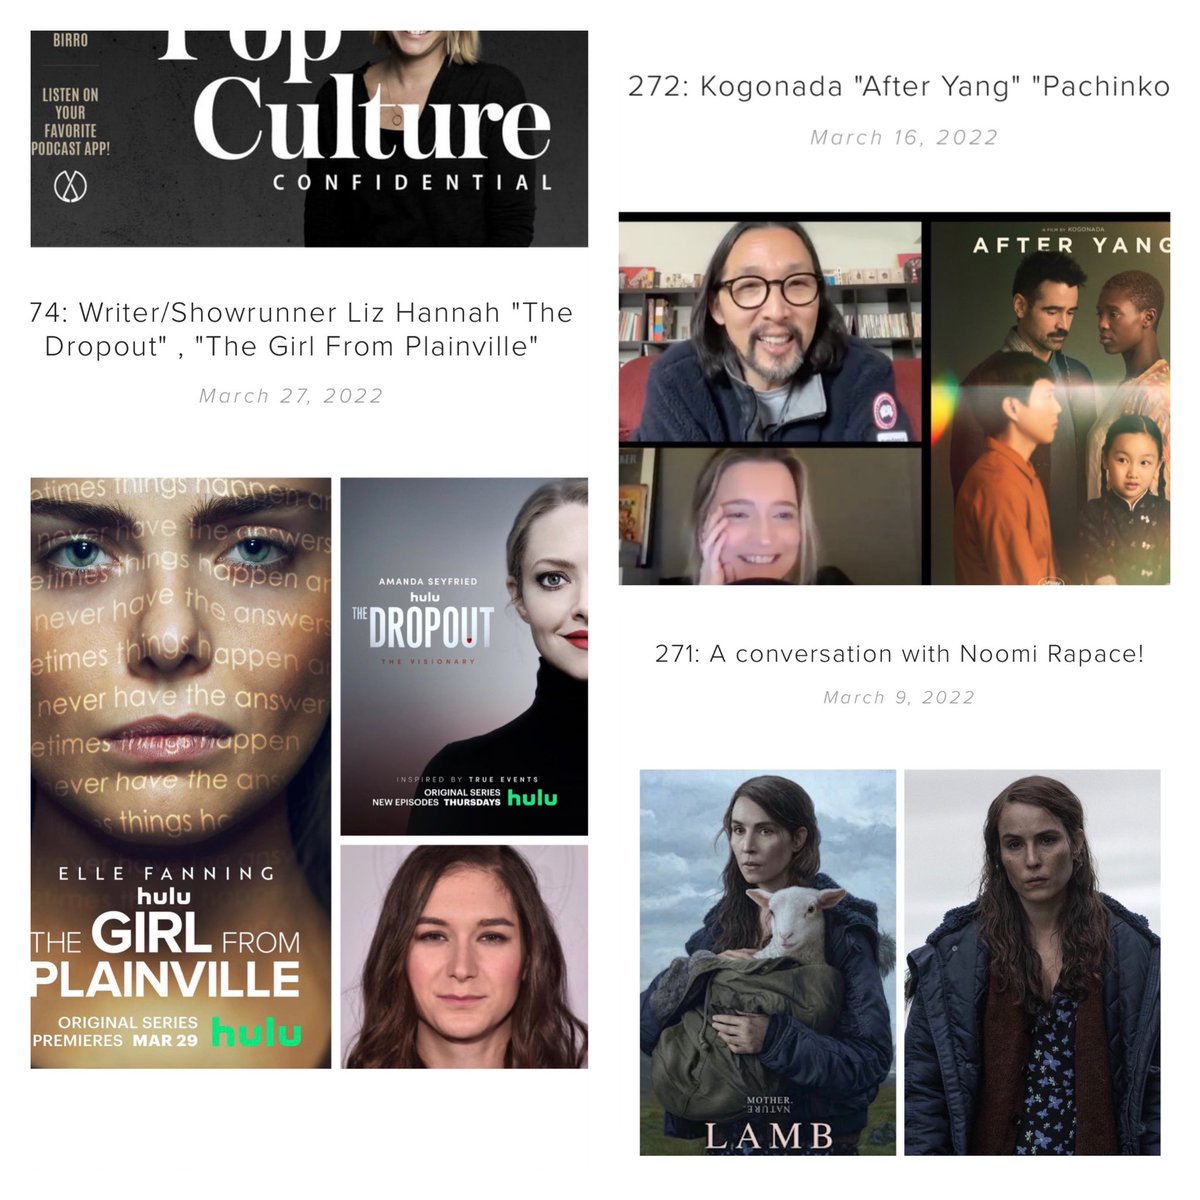 Listen to some very talented people on  Pop Culture Confidential! 🔥

#noomirapace #kogonada @itslizhannah @LambMovie @afteryangmovie #pachinko @TheDropoutHulu @PlainvilleHulu @StreamEvergreen @Spotify @podpopculture @ApplePodcasts